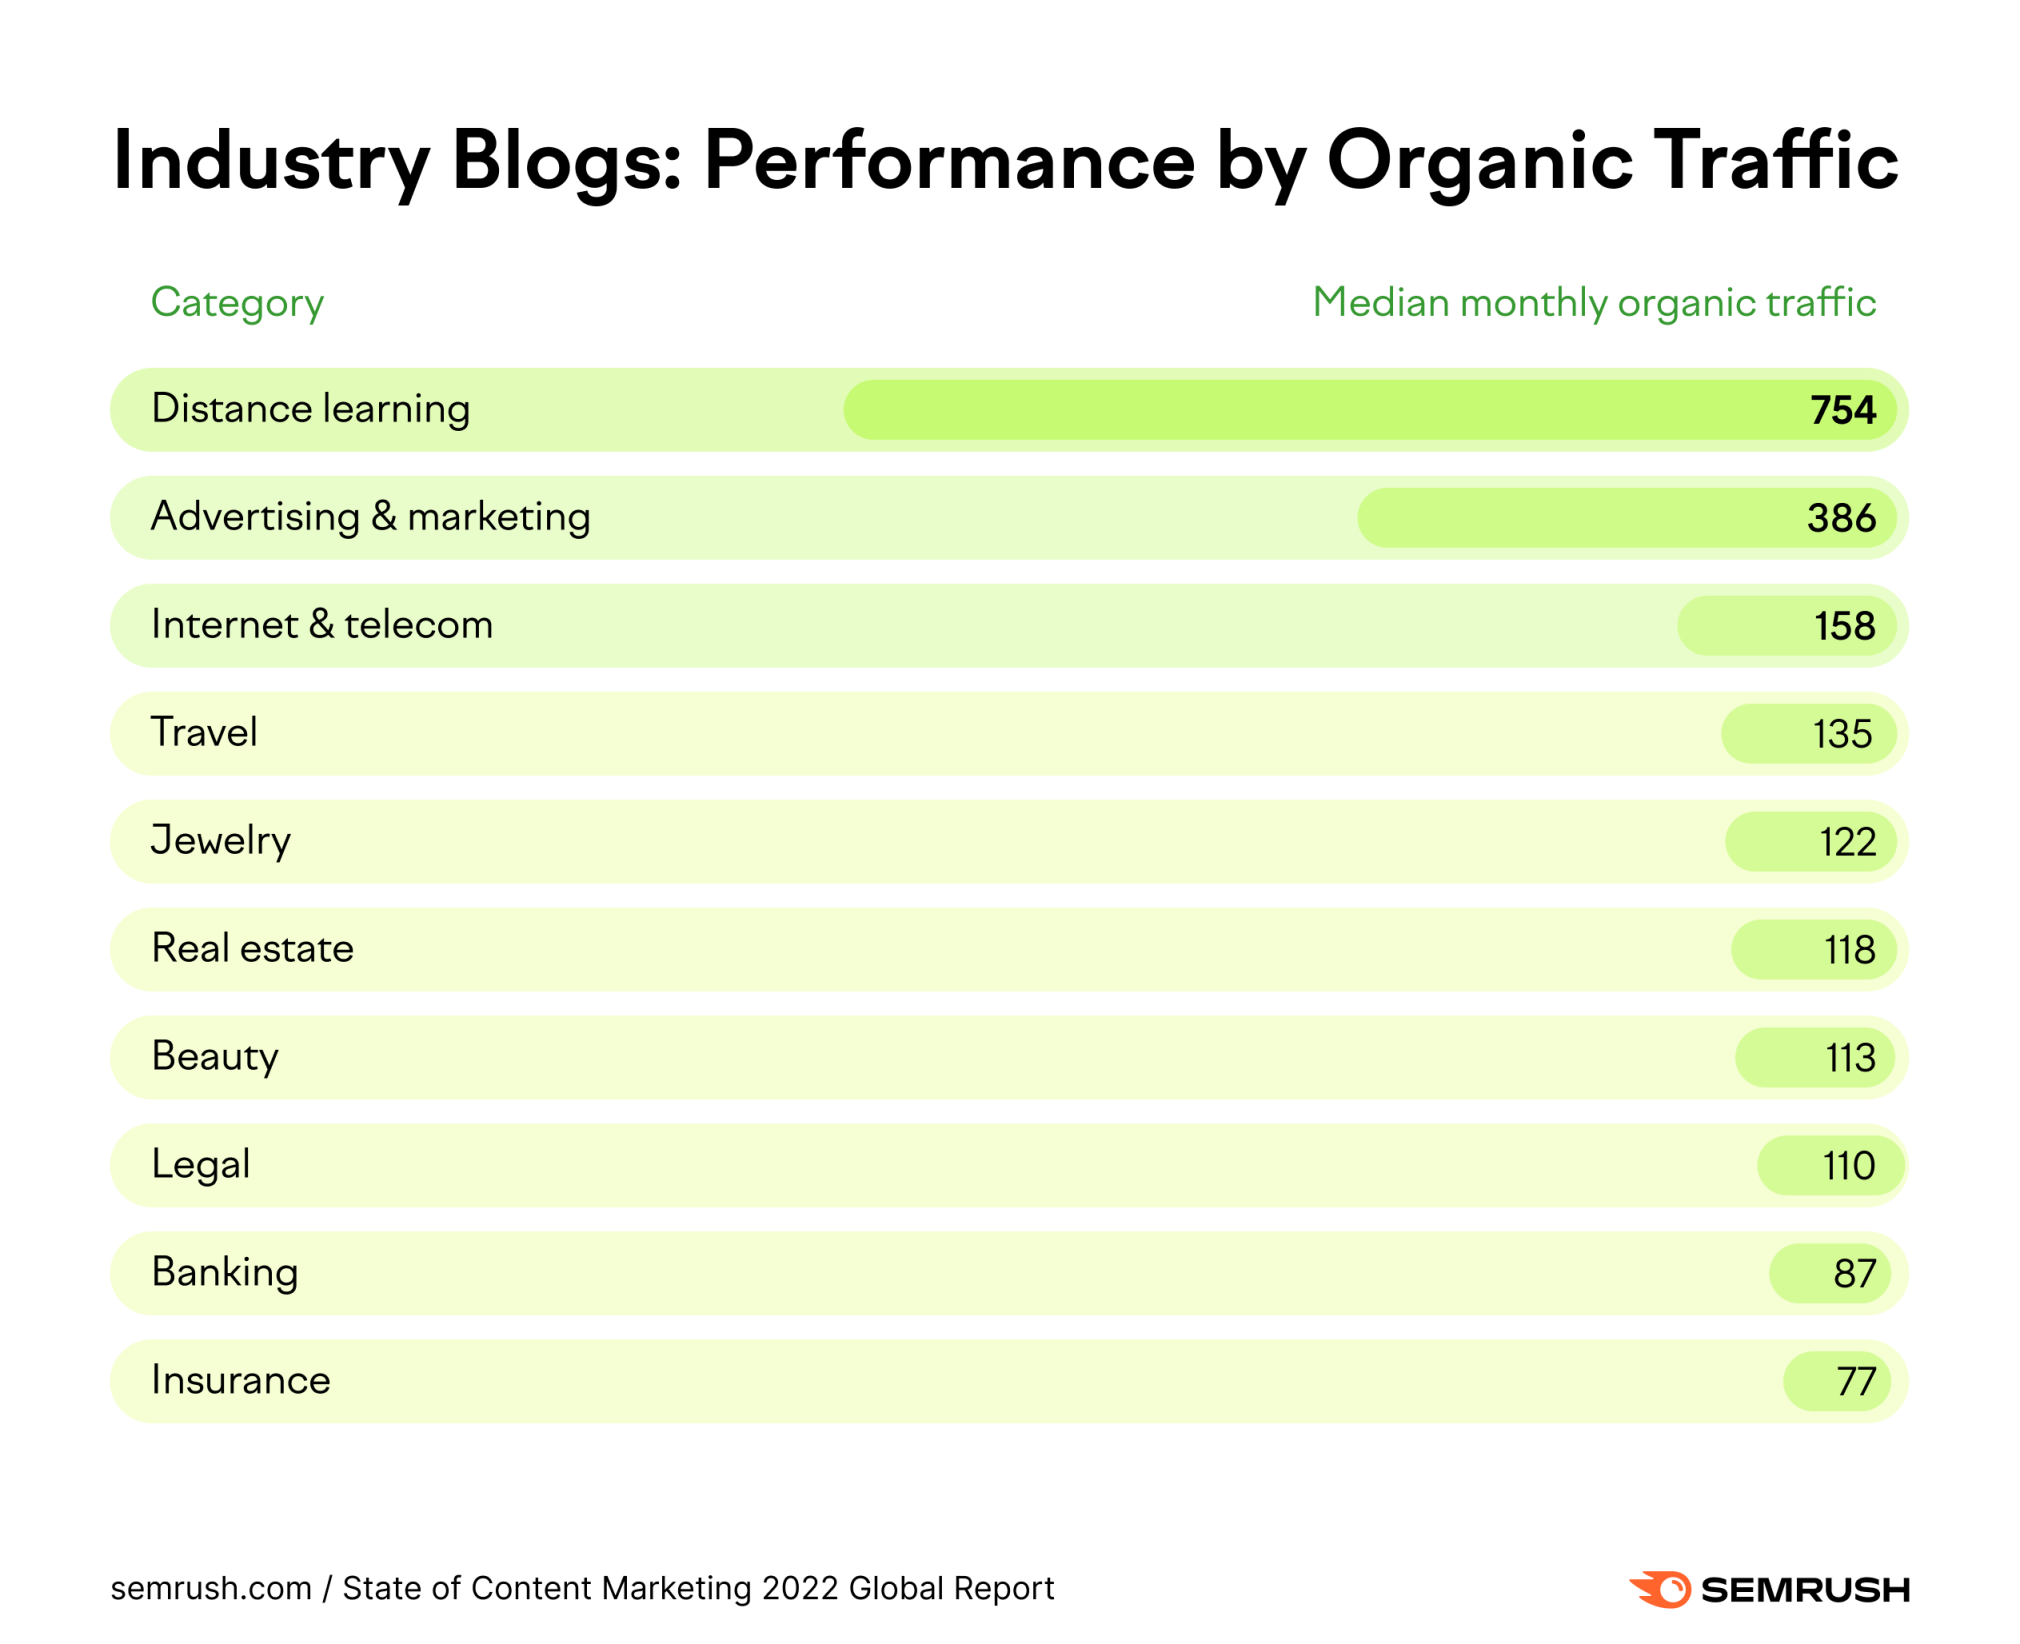 performance by organic traffic in niche industries